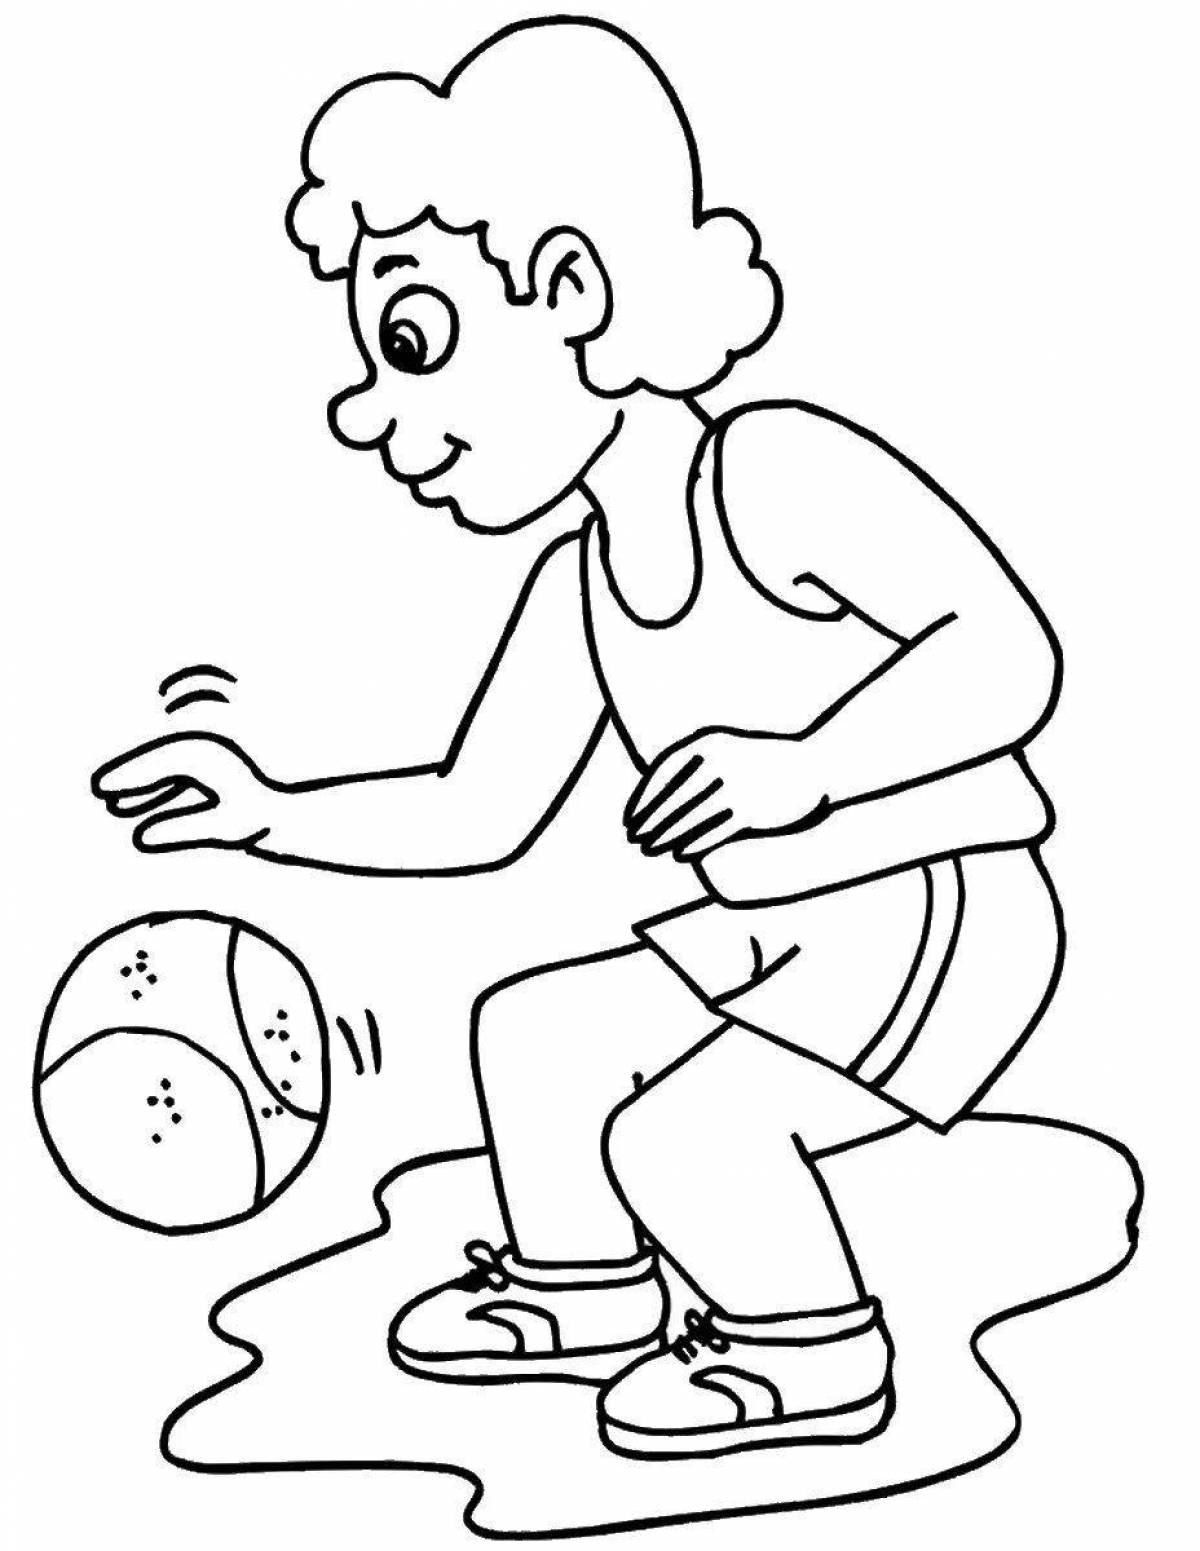 Excellent coloring book health and sports